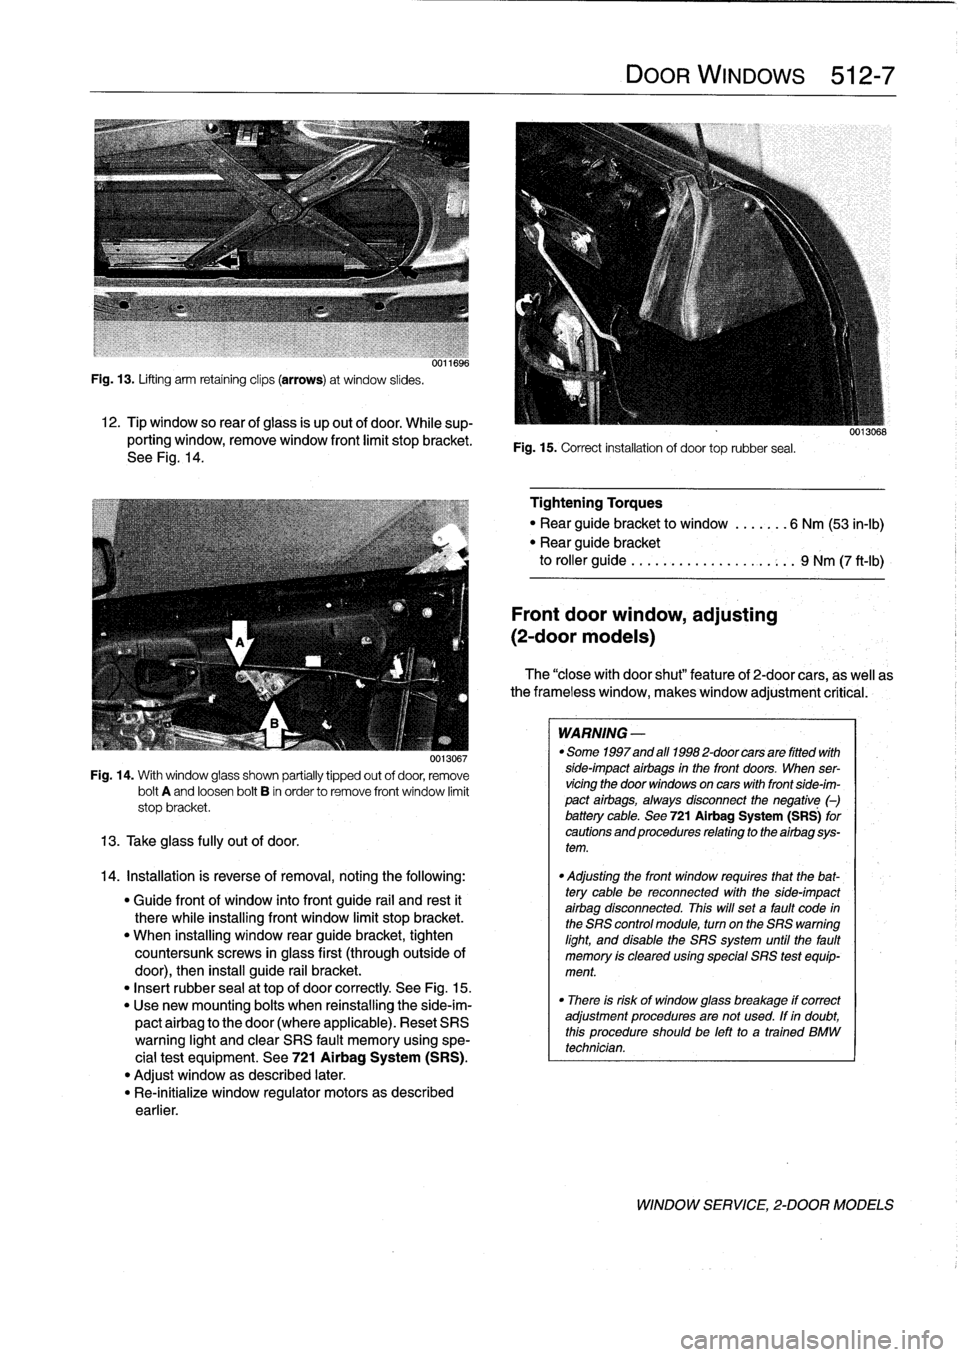 BMW 318i 1995 E36 Workshop Manual 
Fig
.
13
.
Lifting
arm
retaining
clips
(arrows)
at
window
slides
.

12
.
Tip
window
so
rear
ofglass
is
up
out
of
door
.
While
sup-
porting
window,
remove
window
front
limit
stopbracket
.
See
Fig
.
14